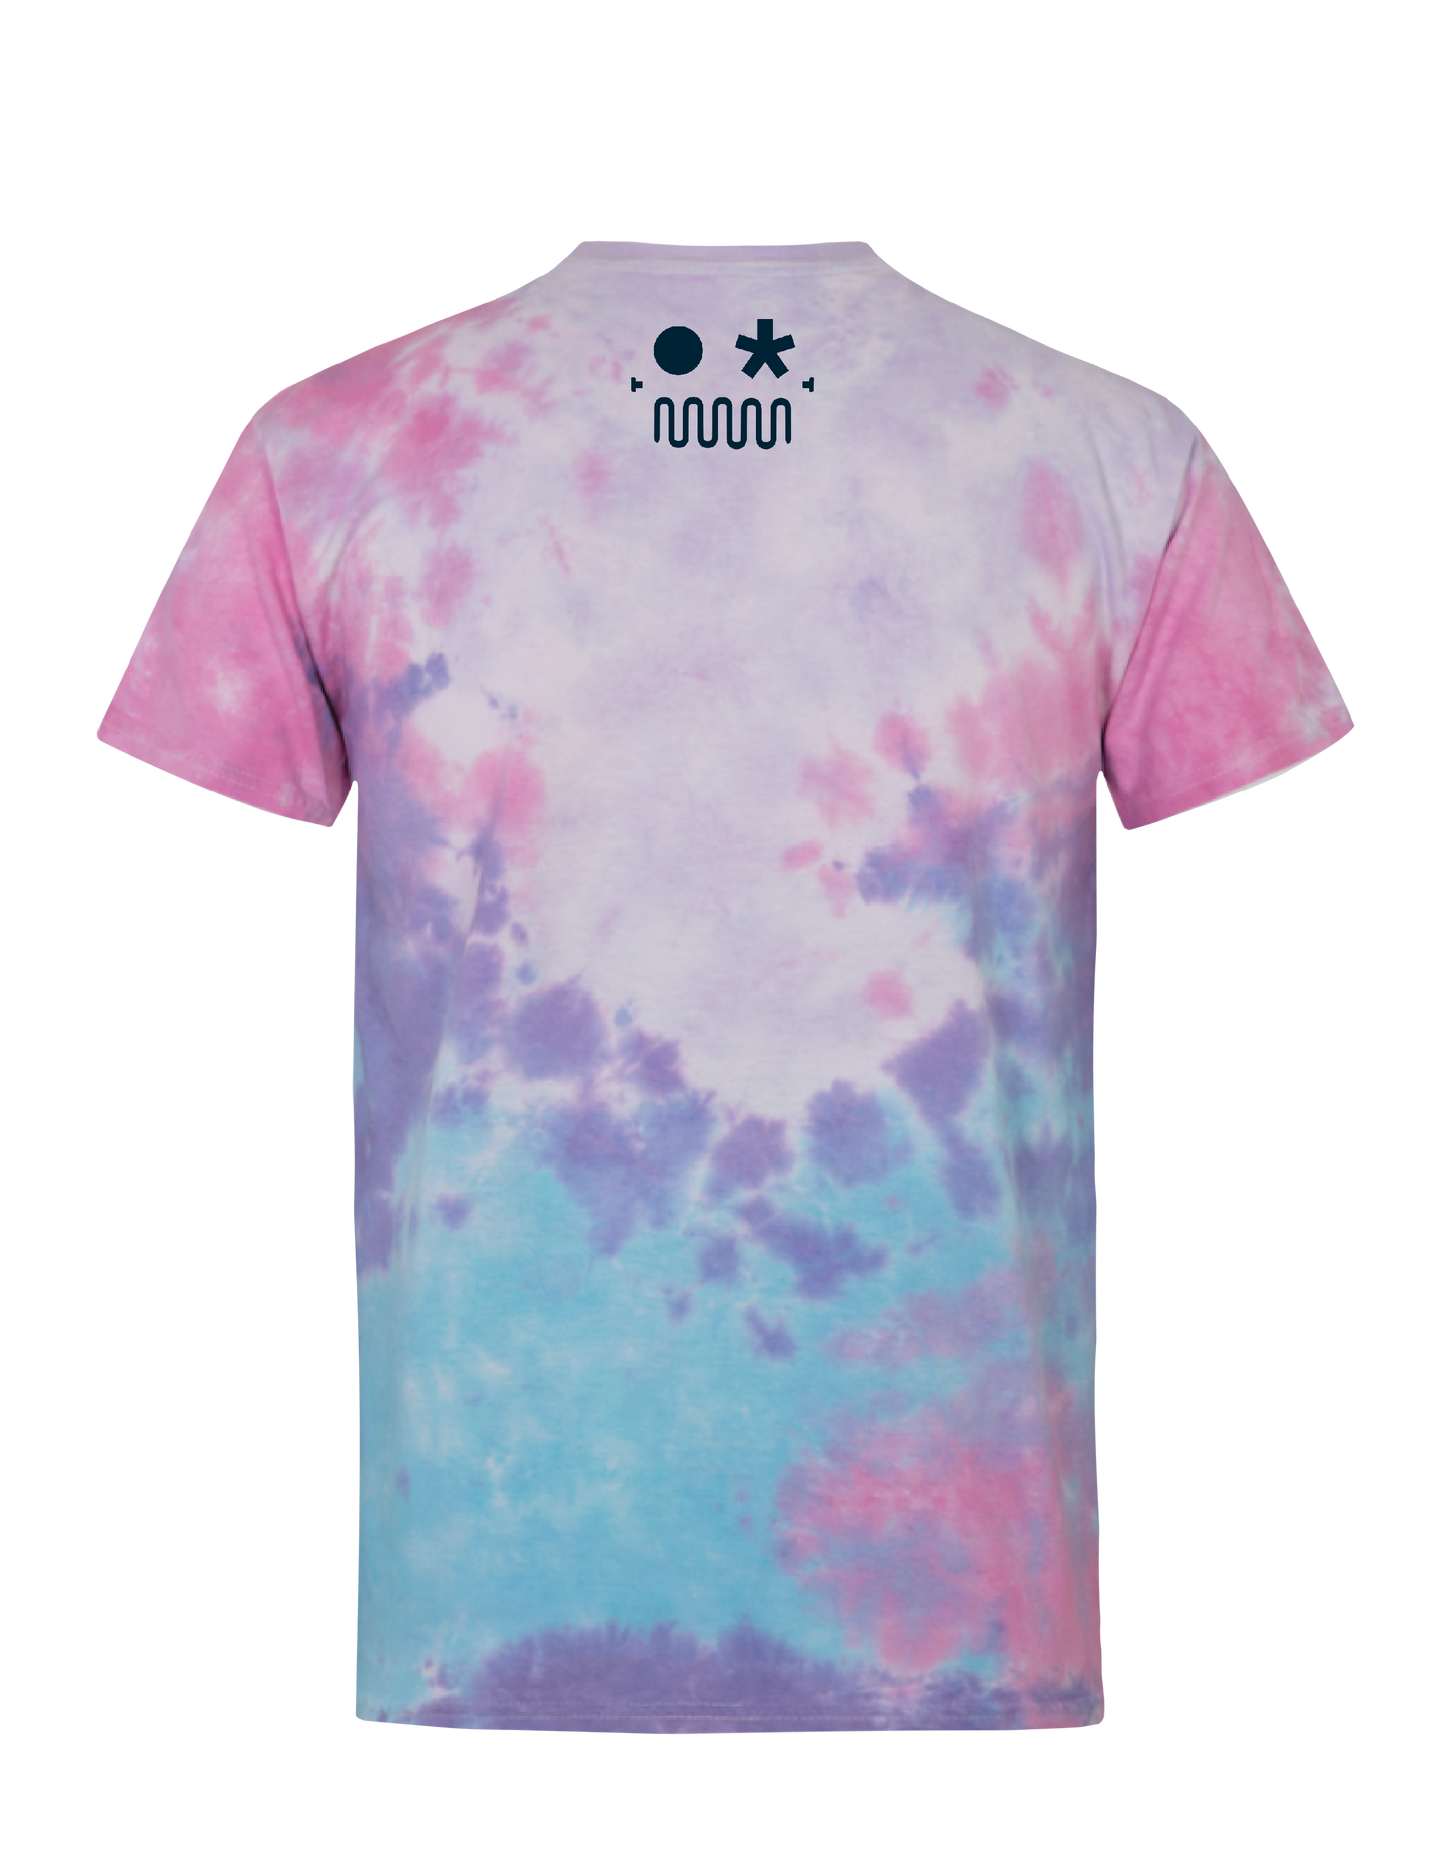 POSTED LIKE A BANDIT* (Cotton Candy Tie-Dye) - T-Shirt